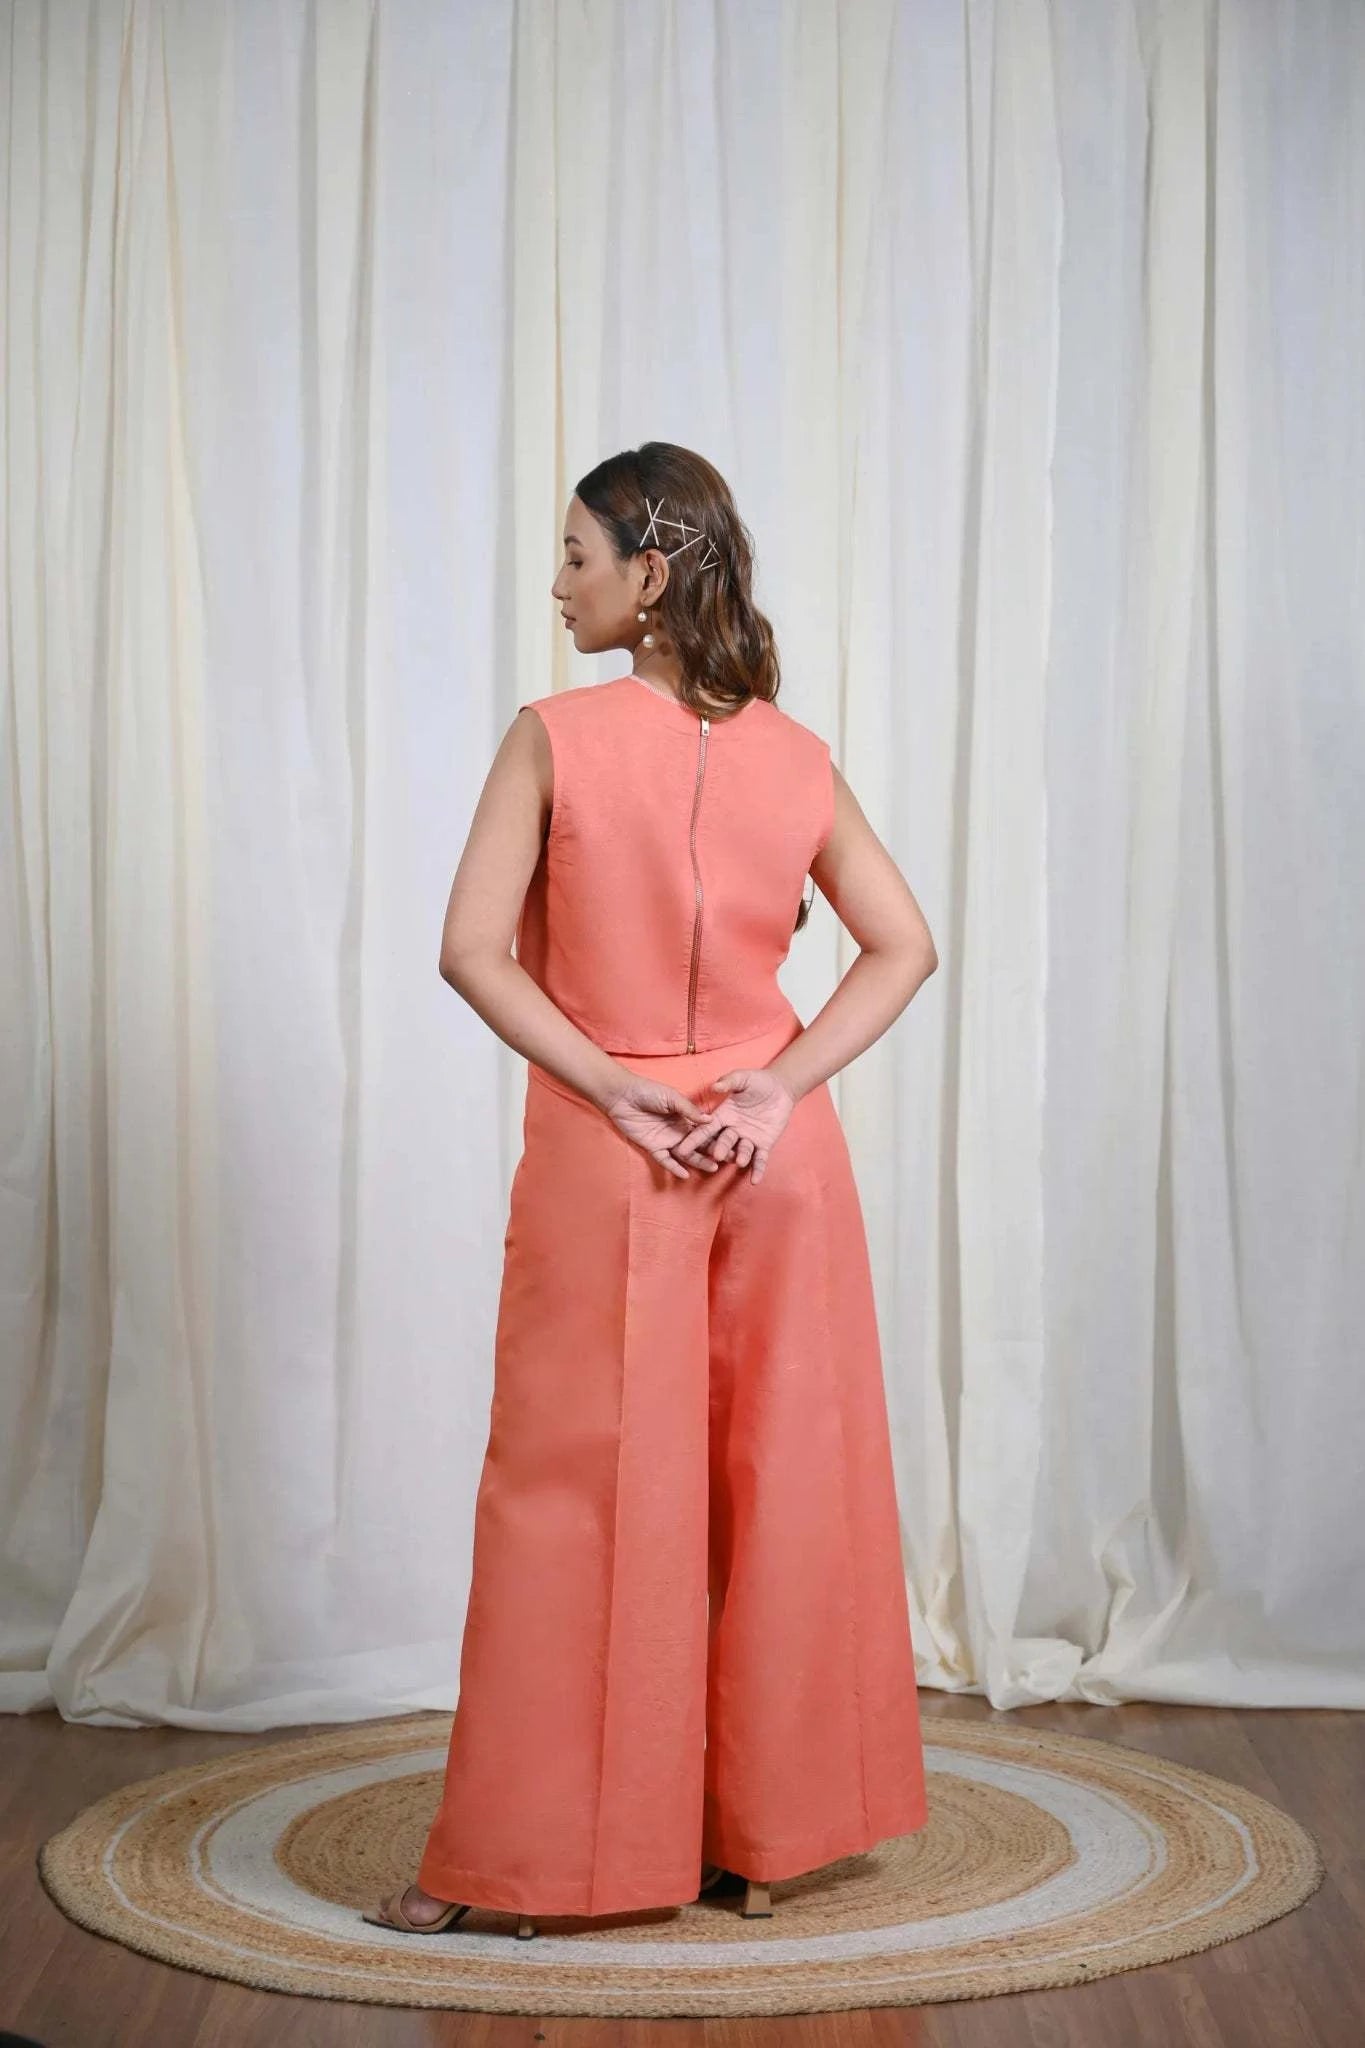 Boxy Trousers in Coral Peach | Ray of Light Collection | Womeswear